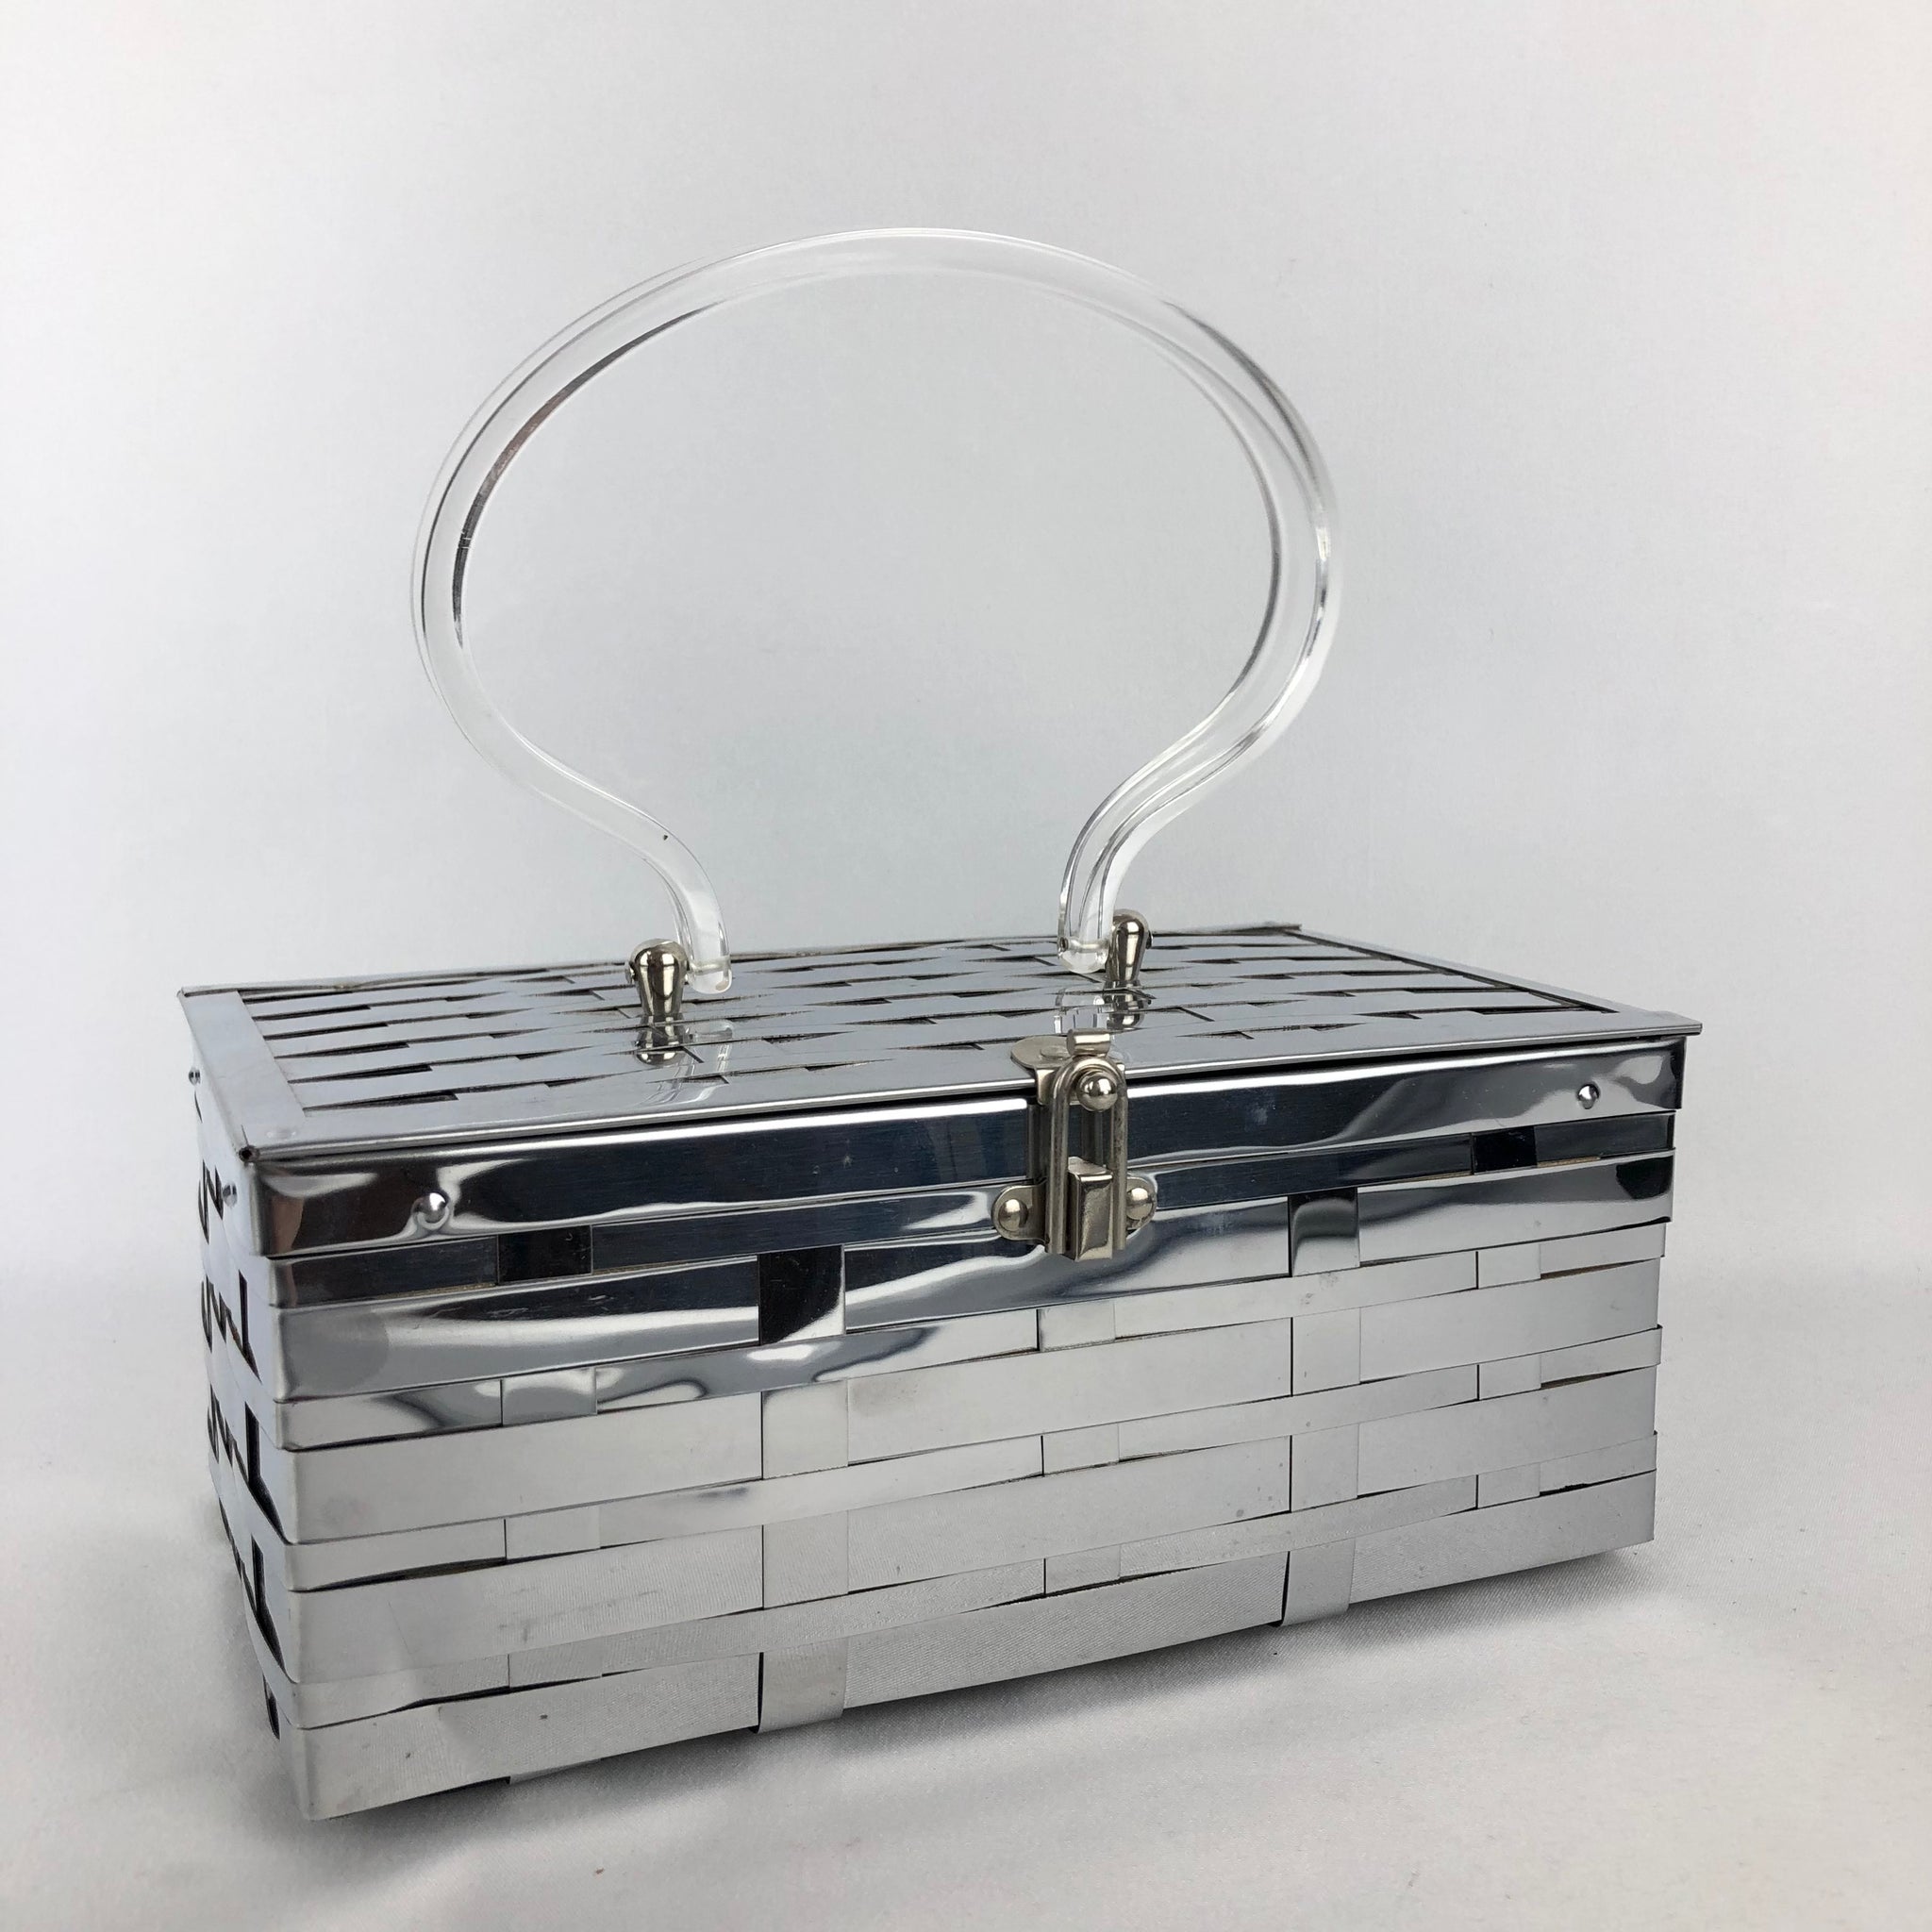 Vintage MW Handbags Lucite Metal Box Purse sold at auction on 23rd February  | Concept Art Gallery